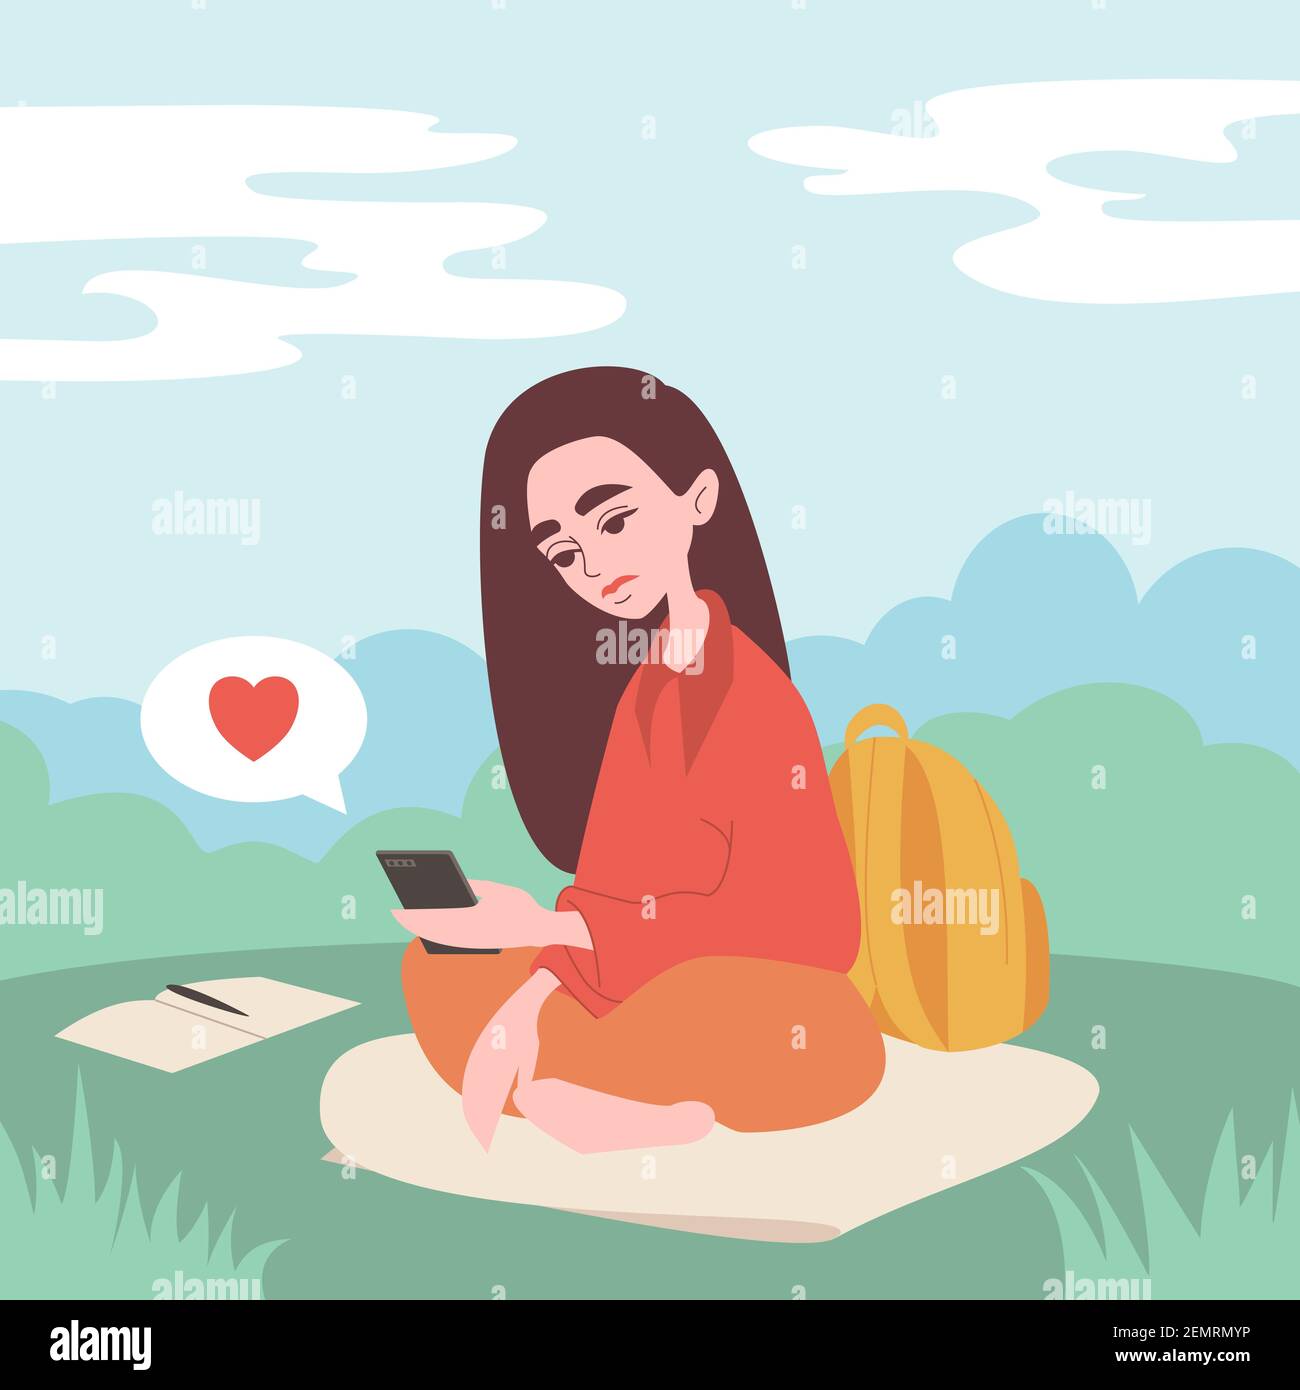 Woman with phone illustration concept. Girl Browsing Internet, Chatting, Blogging. Young girls using phone, sitting legs crossed. Stock Vector